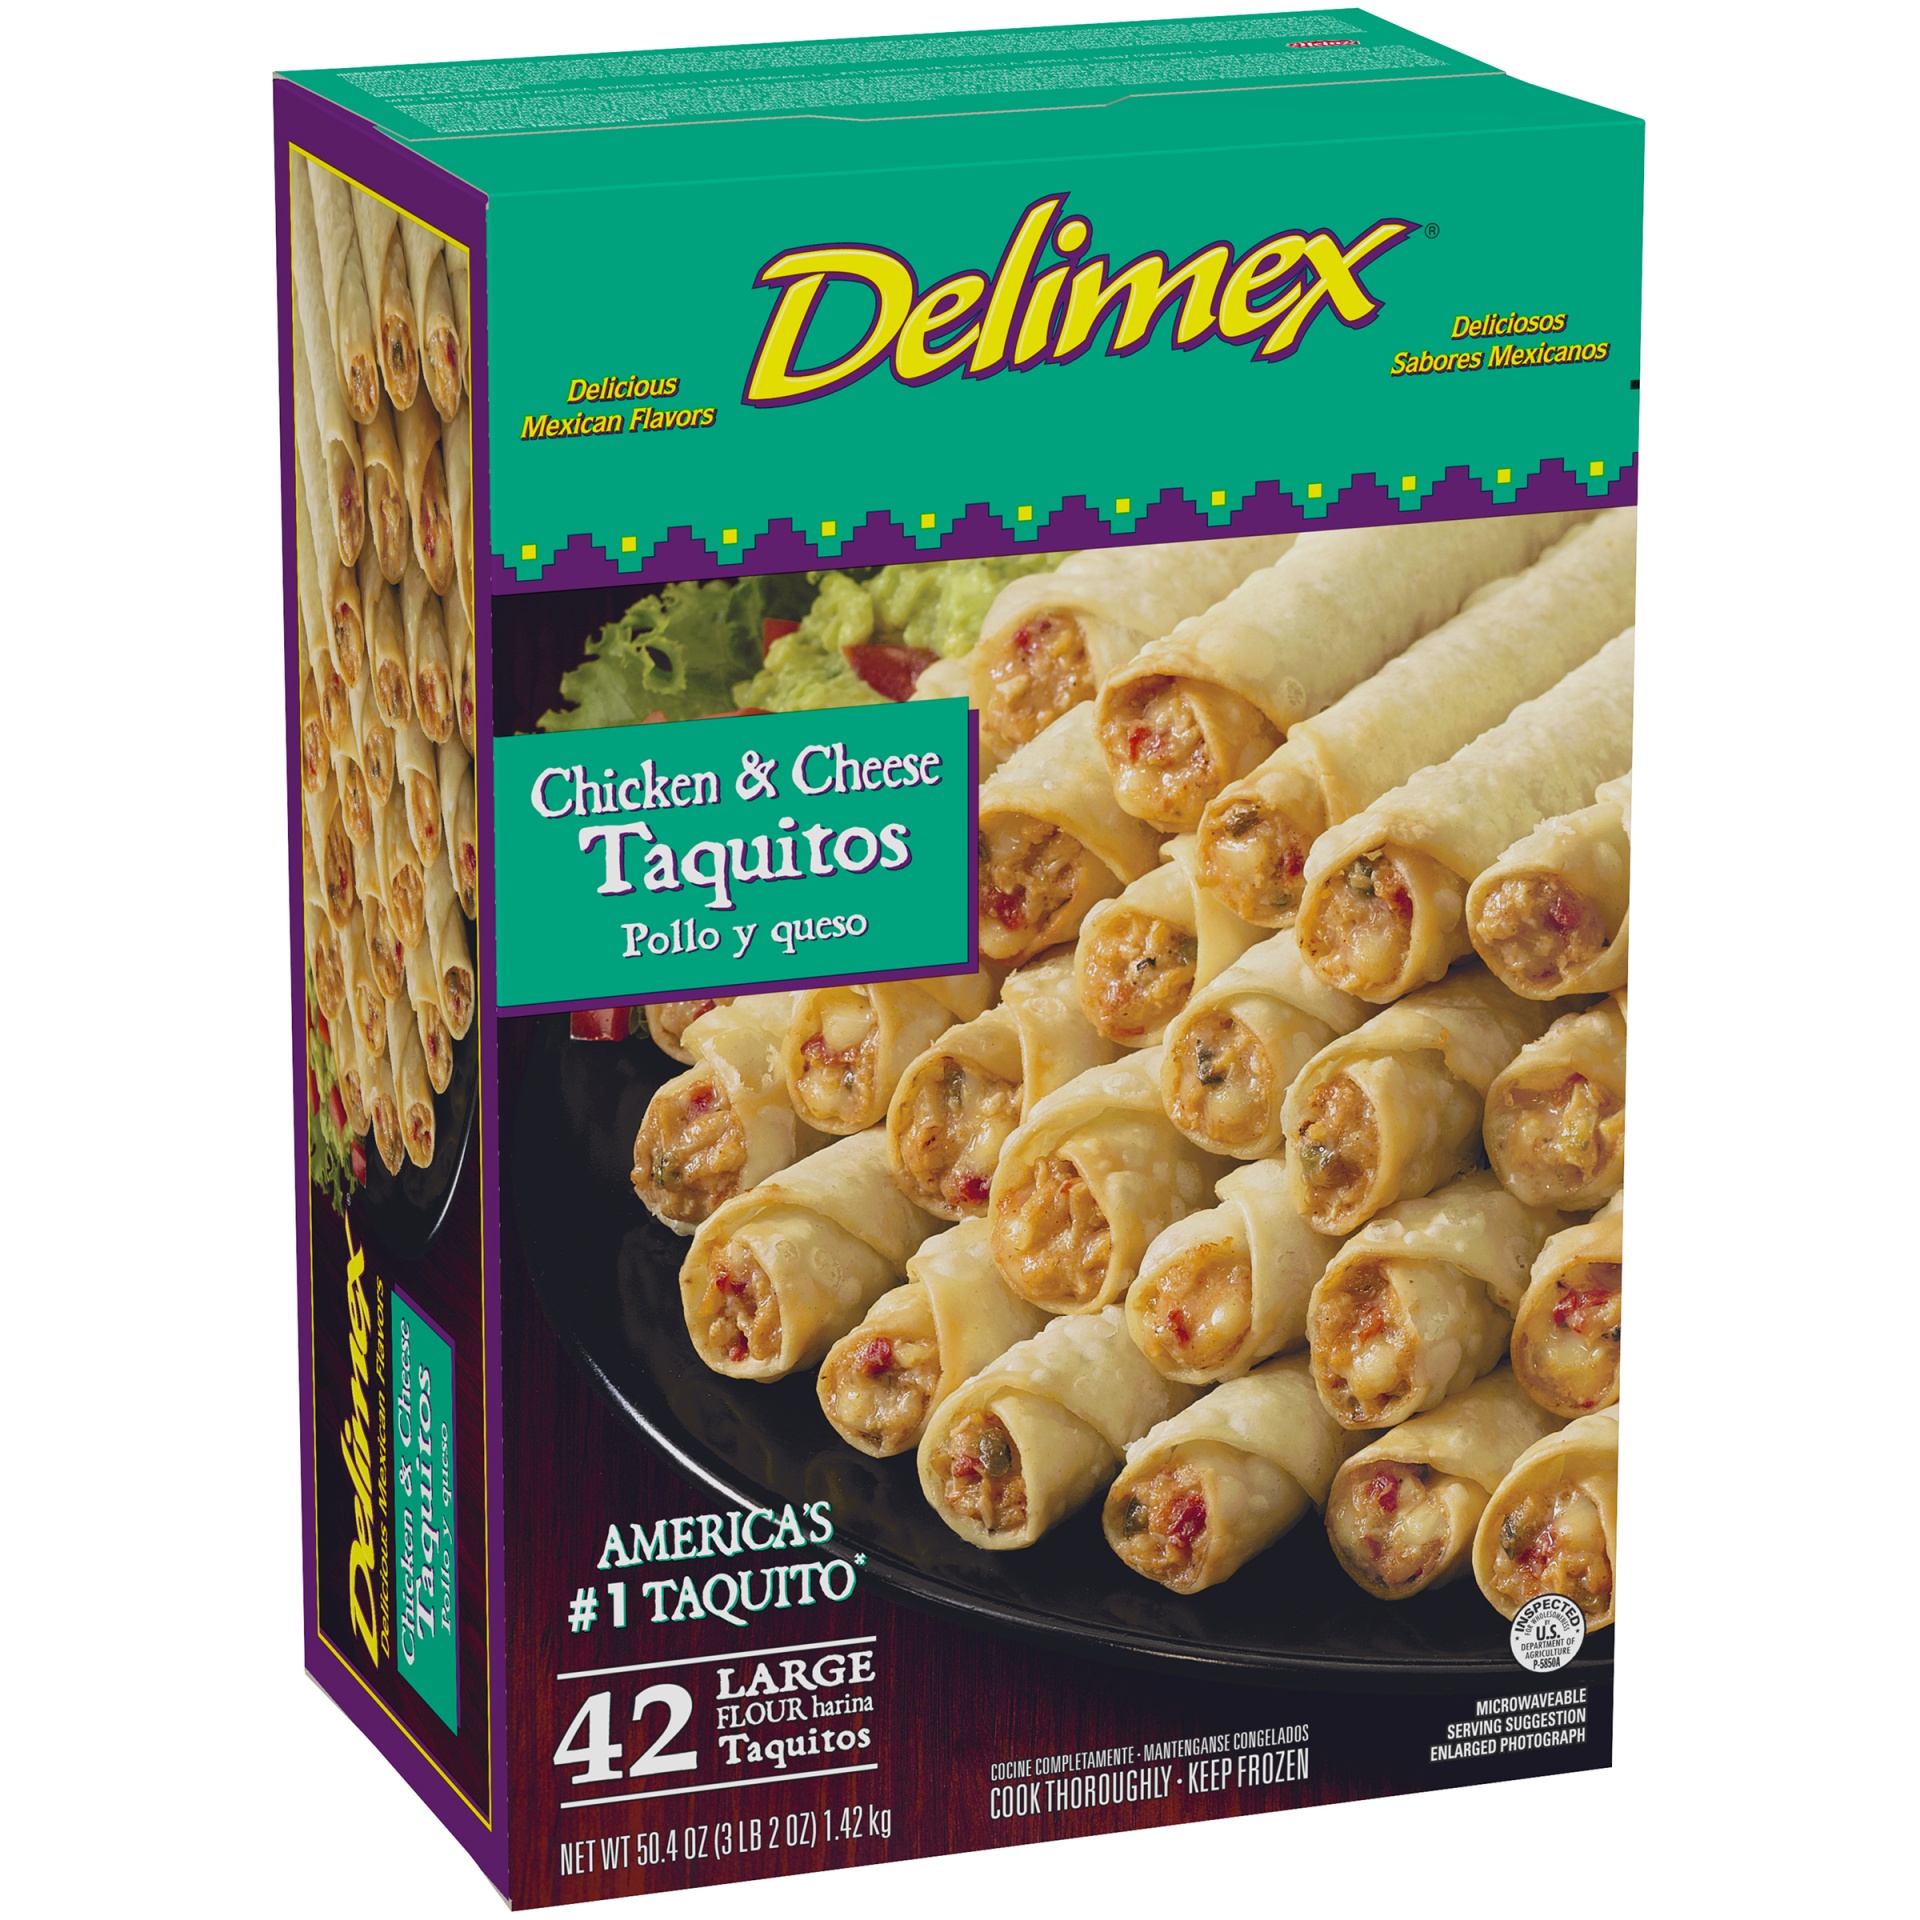 Delimex Chicken & Cheese Taquitos | Shipt